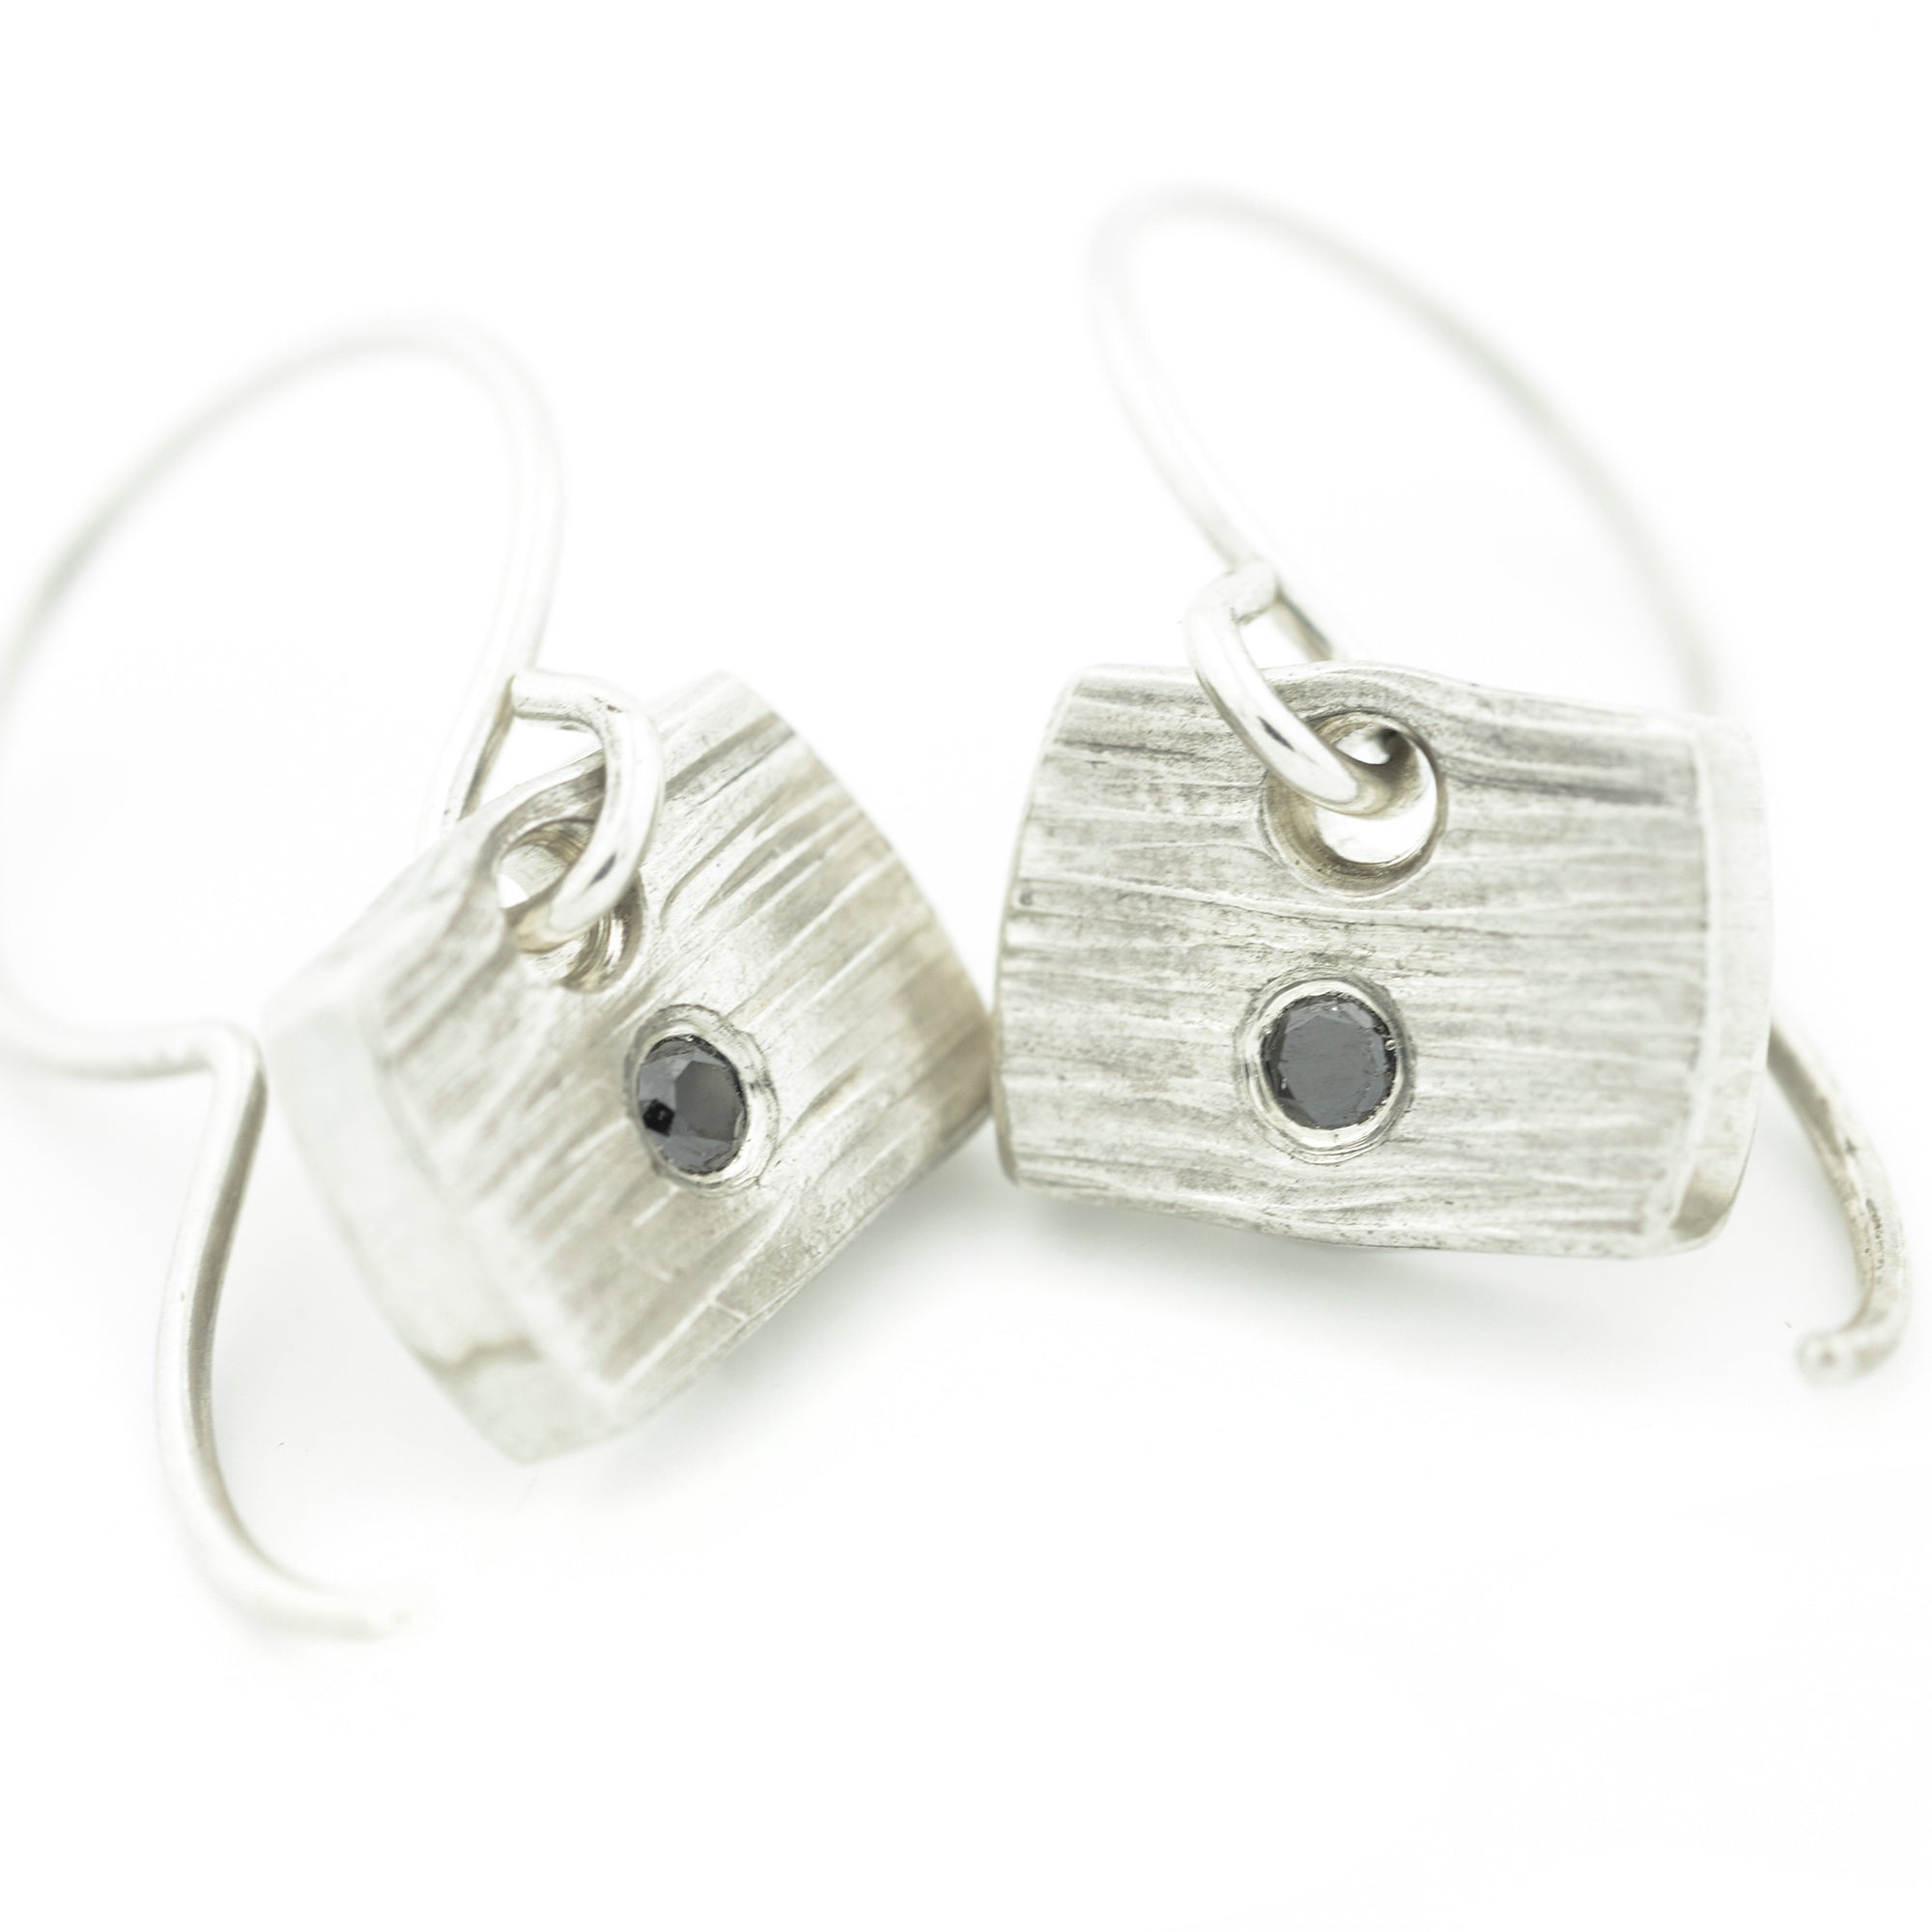 Textured Silver Tile Earrings with Black Diamonds